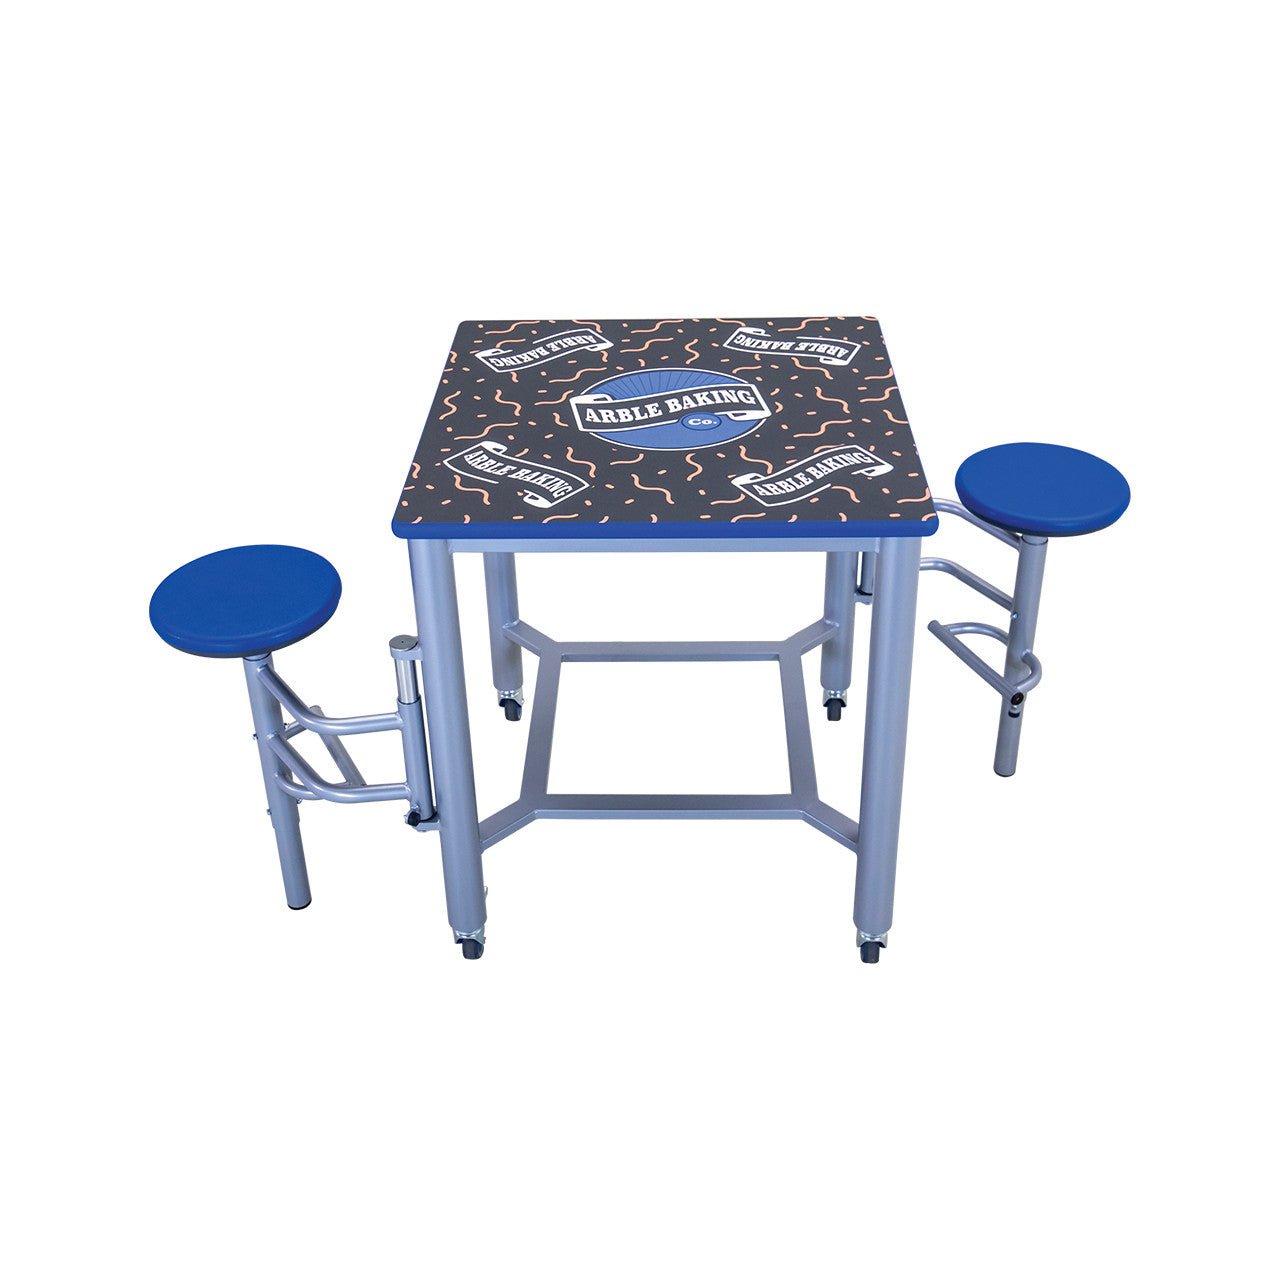 AmTab Mobile Stool Table - Double Collaboration High Table - 36"W x 36"L x 42"H/30"H Seat - 2 Stools (AMT-MDST3636-42) - SchoolOutlet